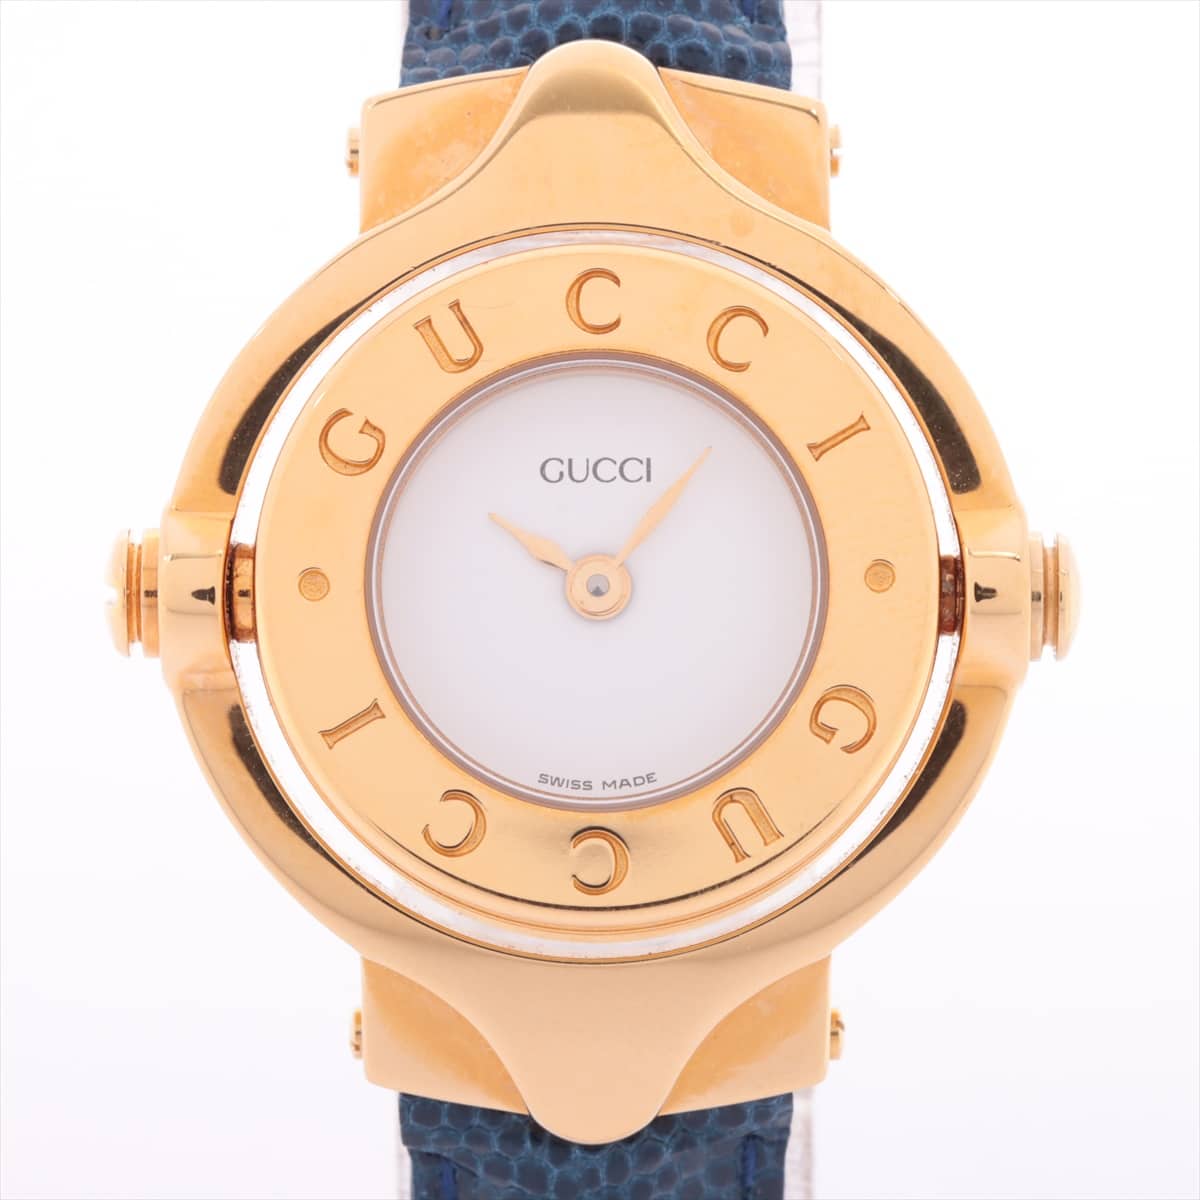 Gucci Bangle Watch G logo turnface 6600L GP & Leather QZ White-Face